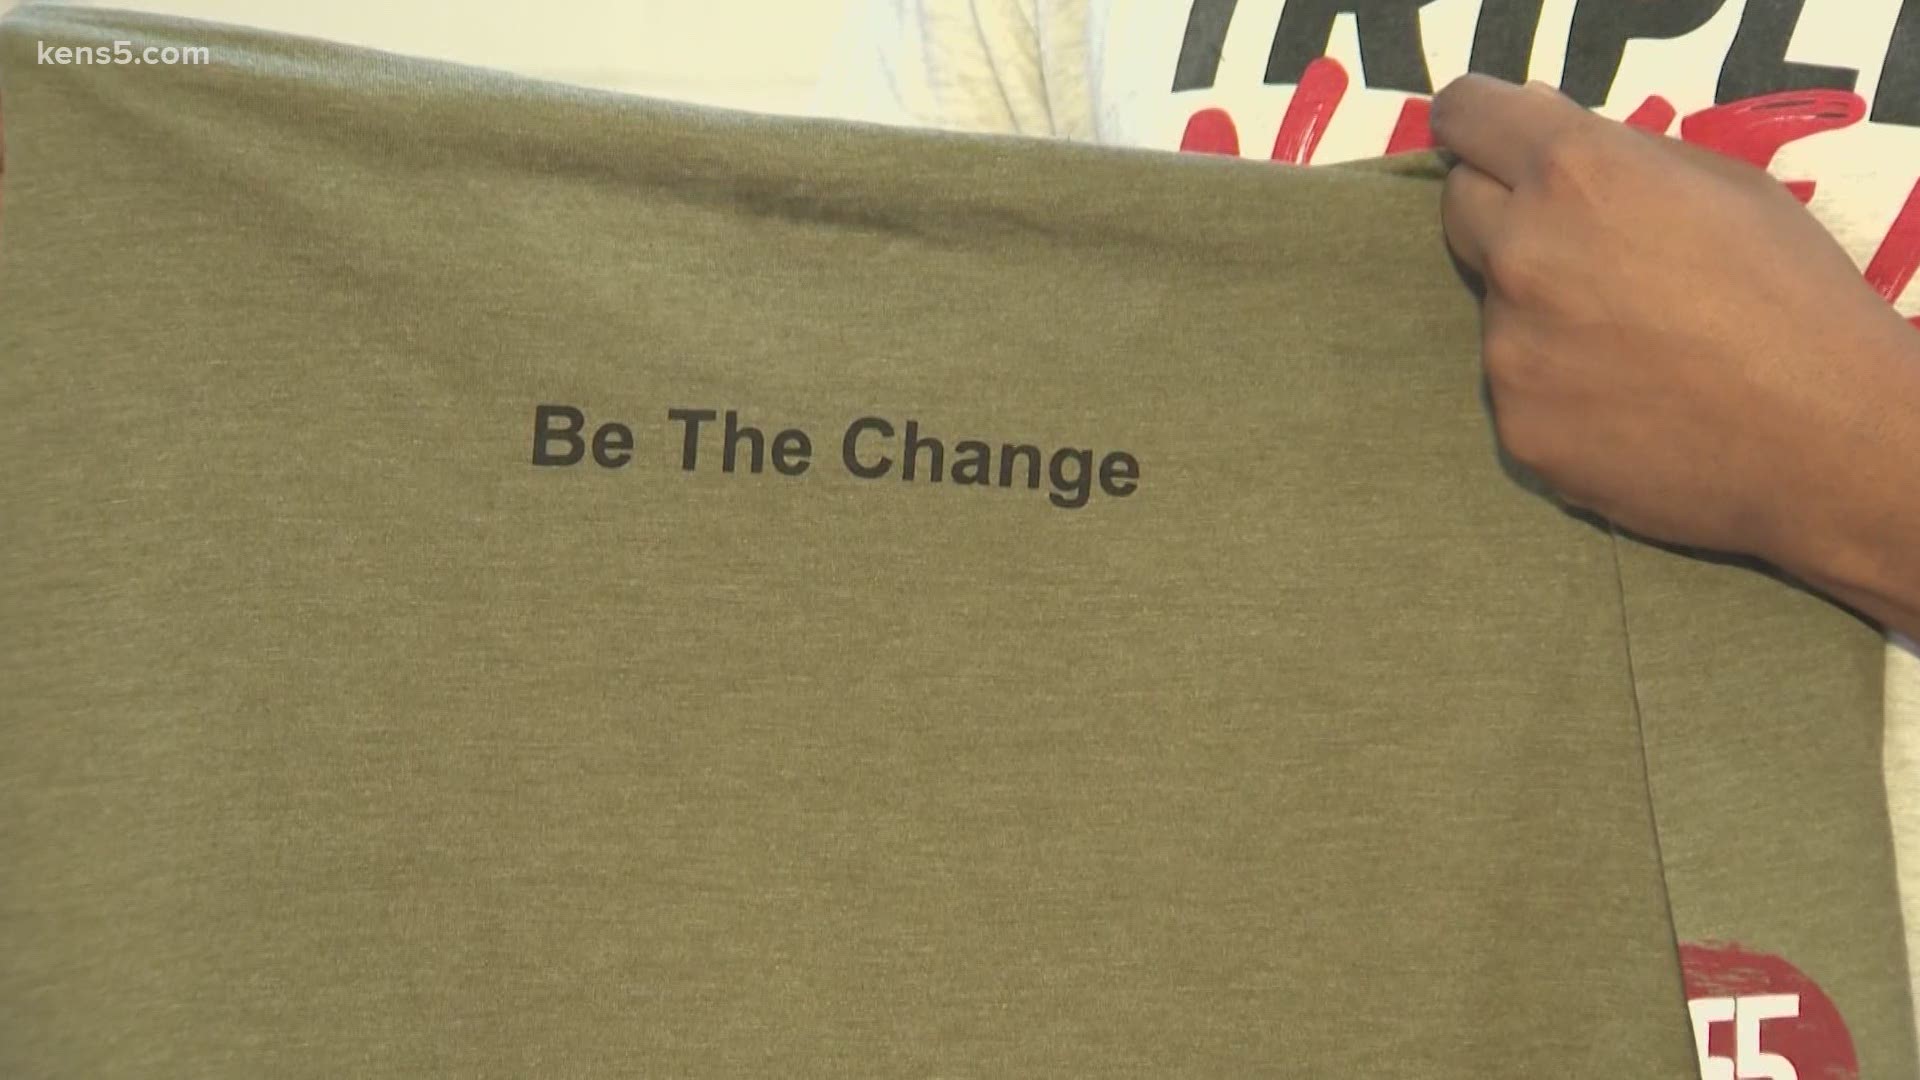 Clothing choice can say a lot to the rest of the world. For a group of veterans, their mission with a new clothing brand is to promote diversity.